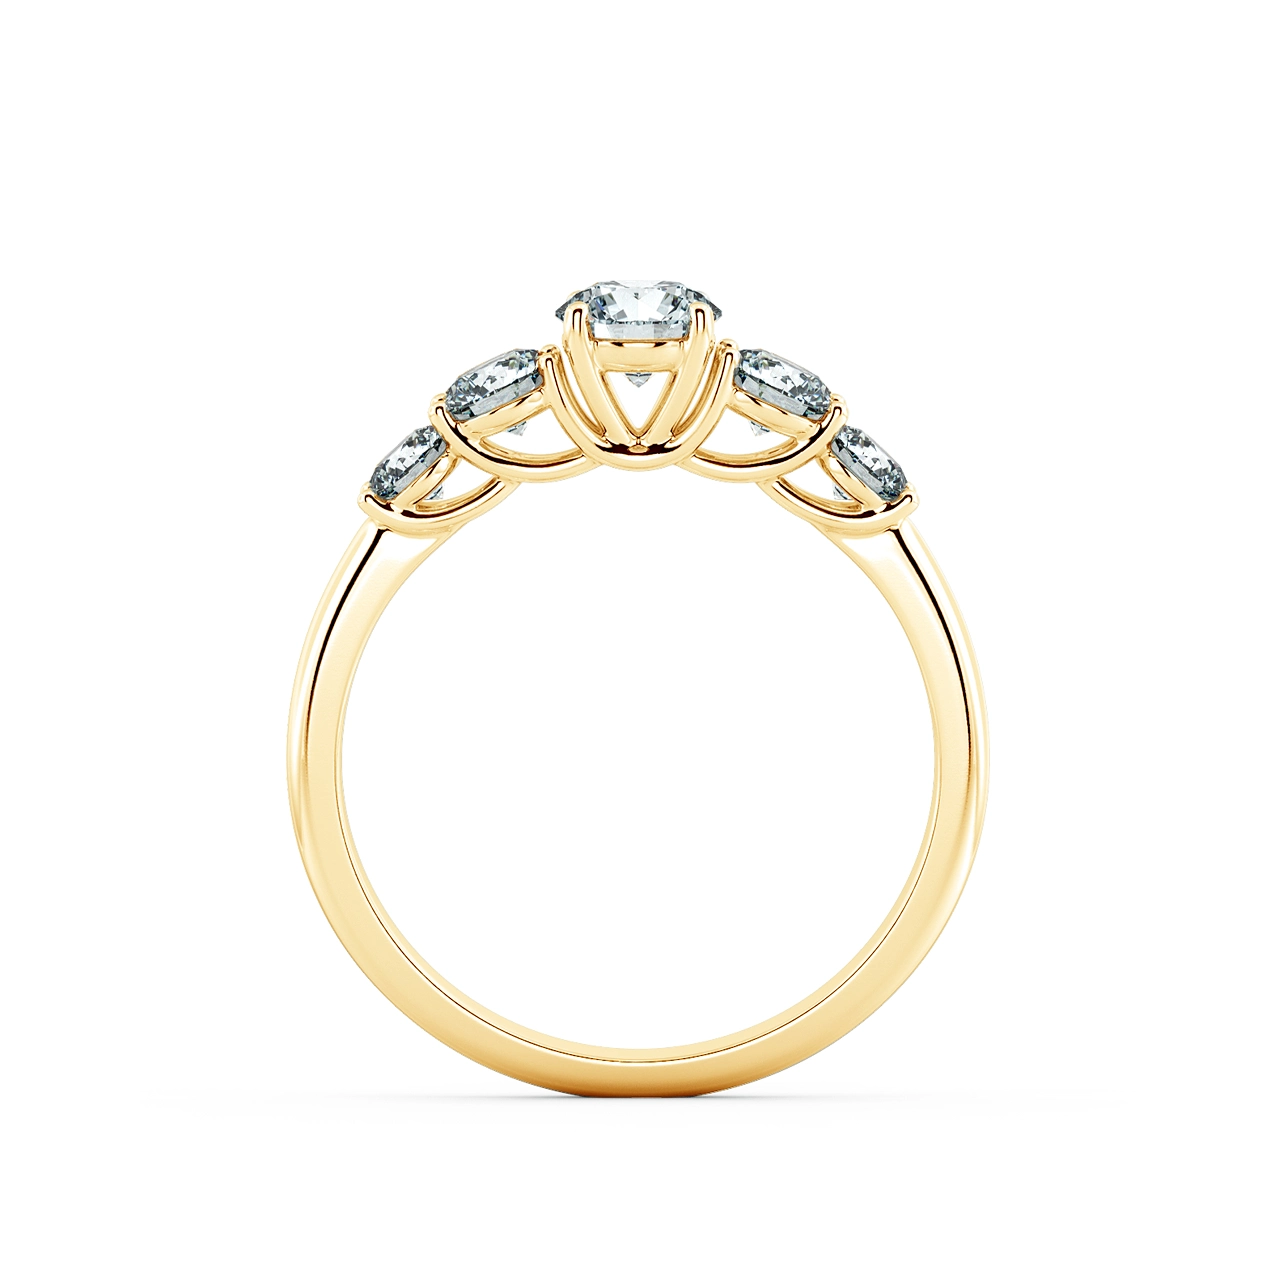 Fivestones Engagement Ring with Trellis st<x>yle NCH3302 5